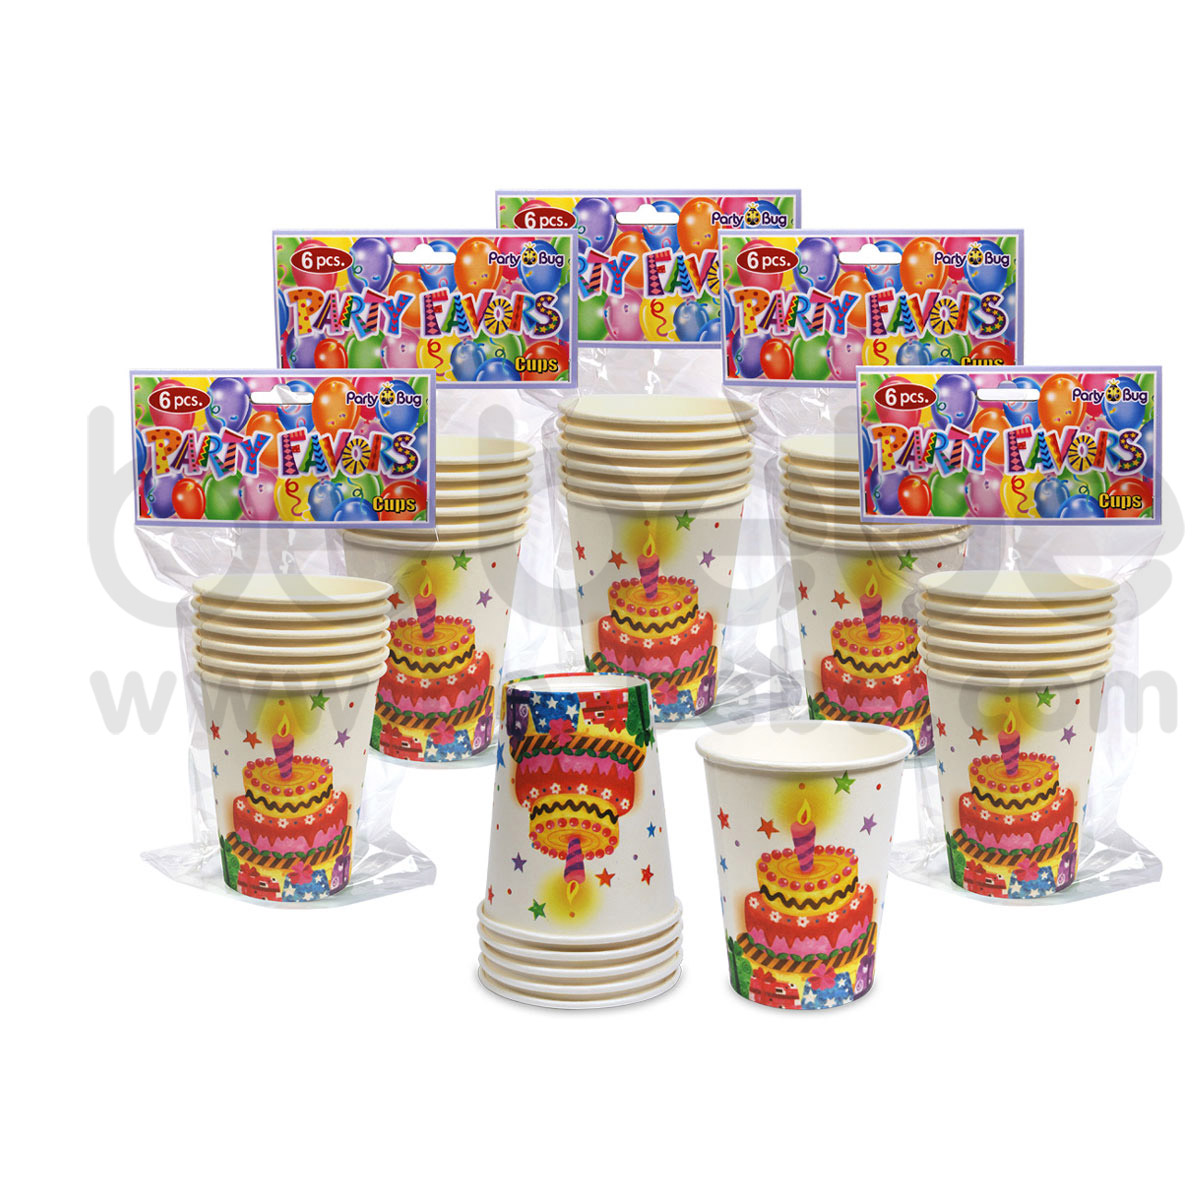 PARTY BUG : Paper cup 9 Oz., 6 Packs